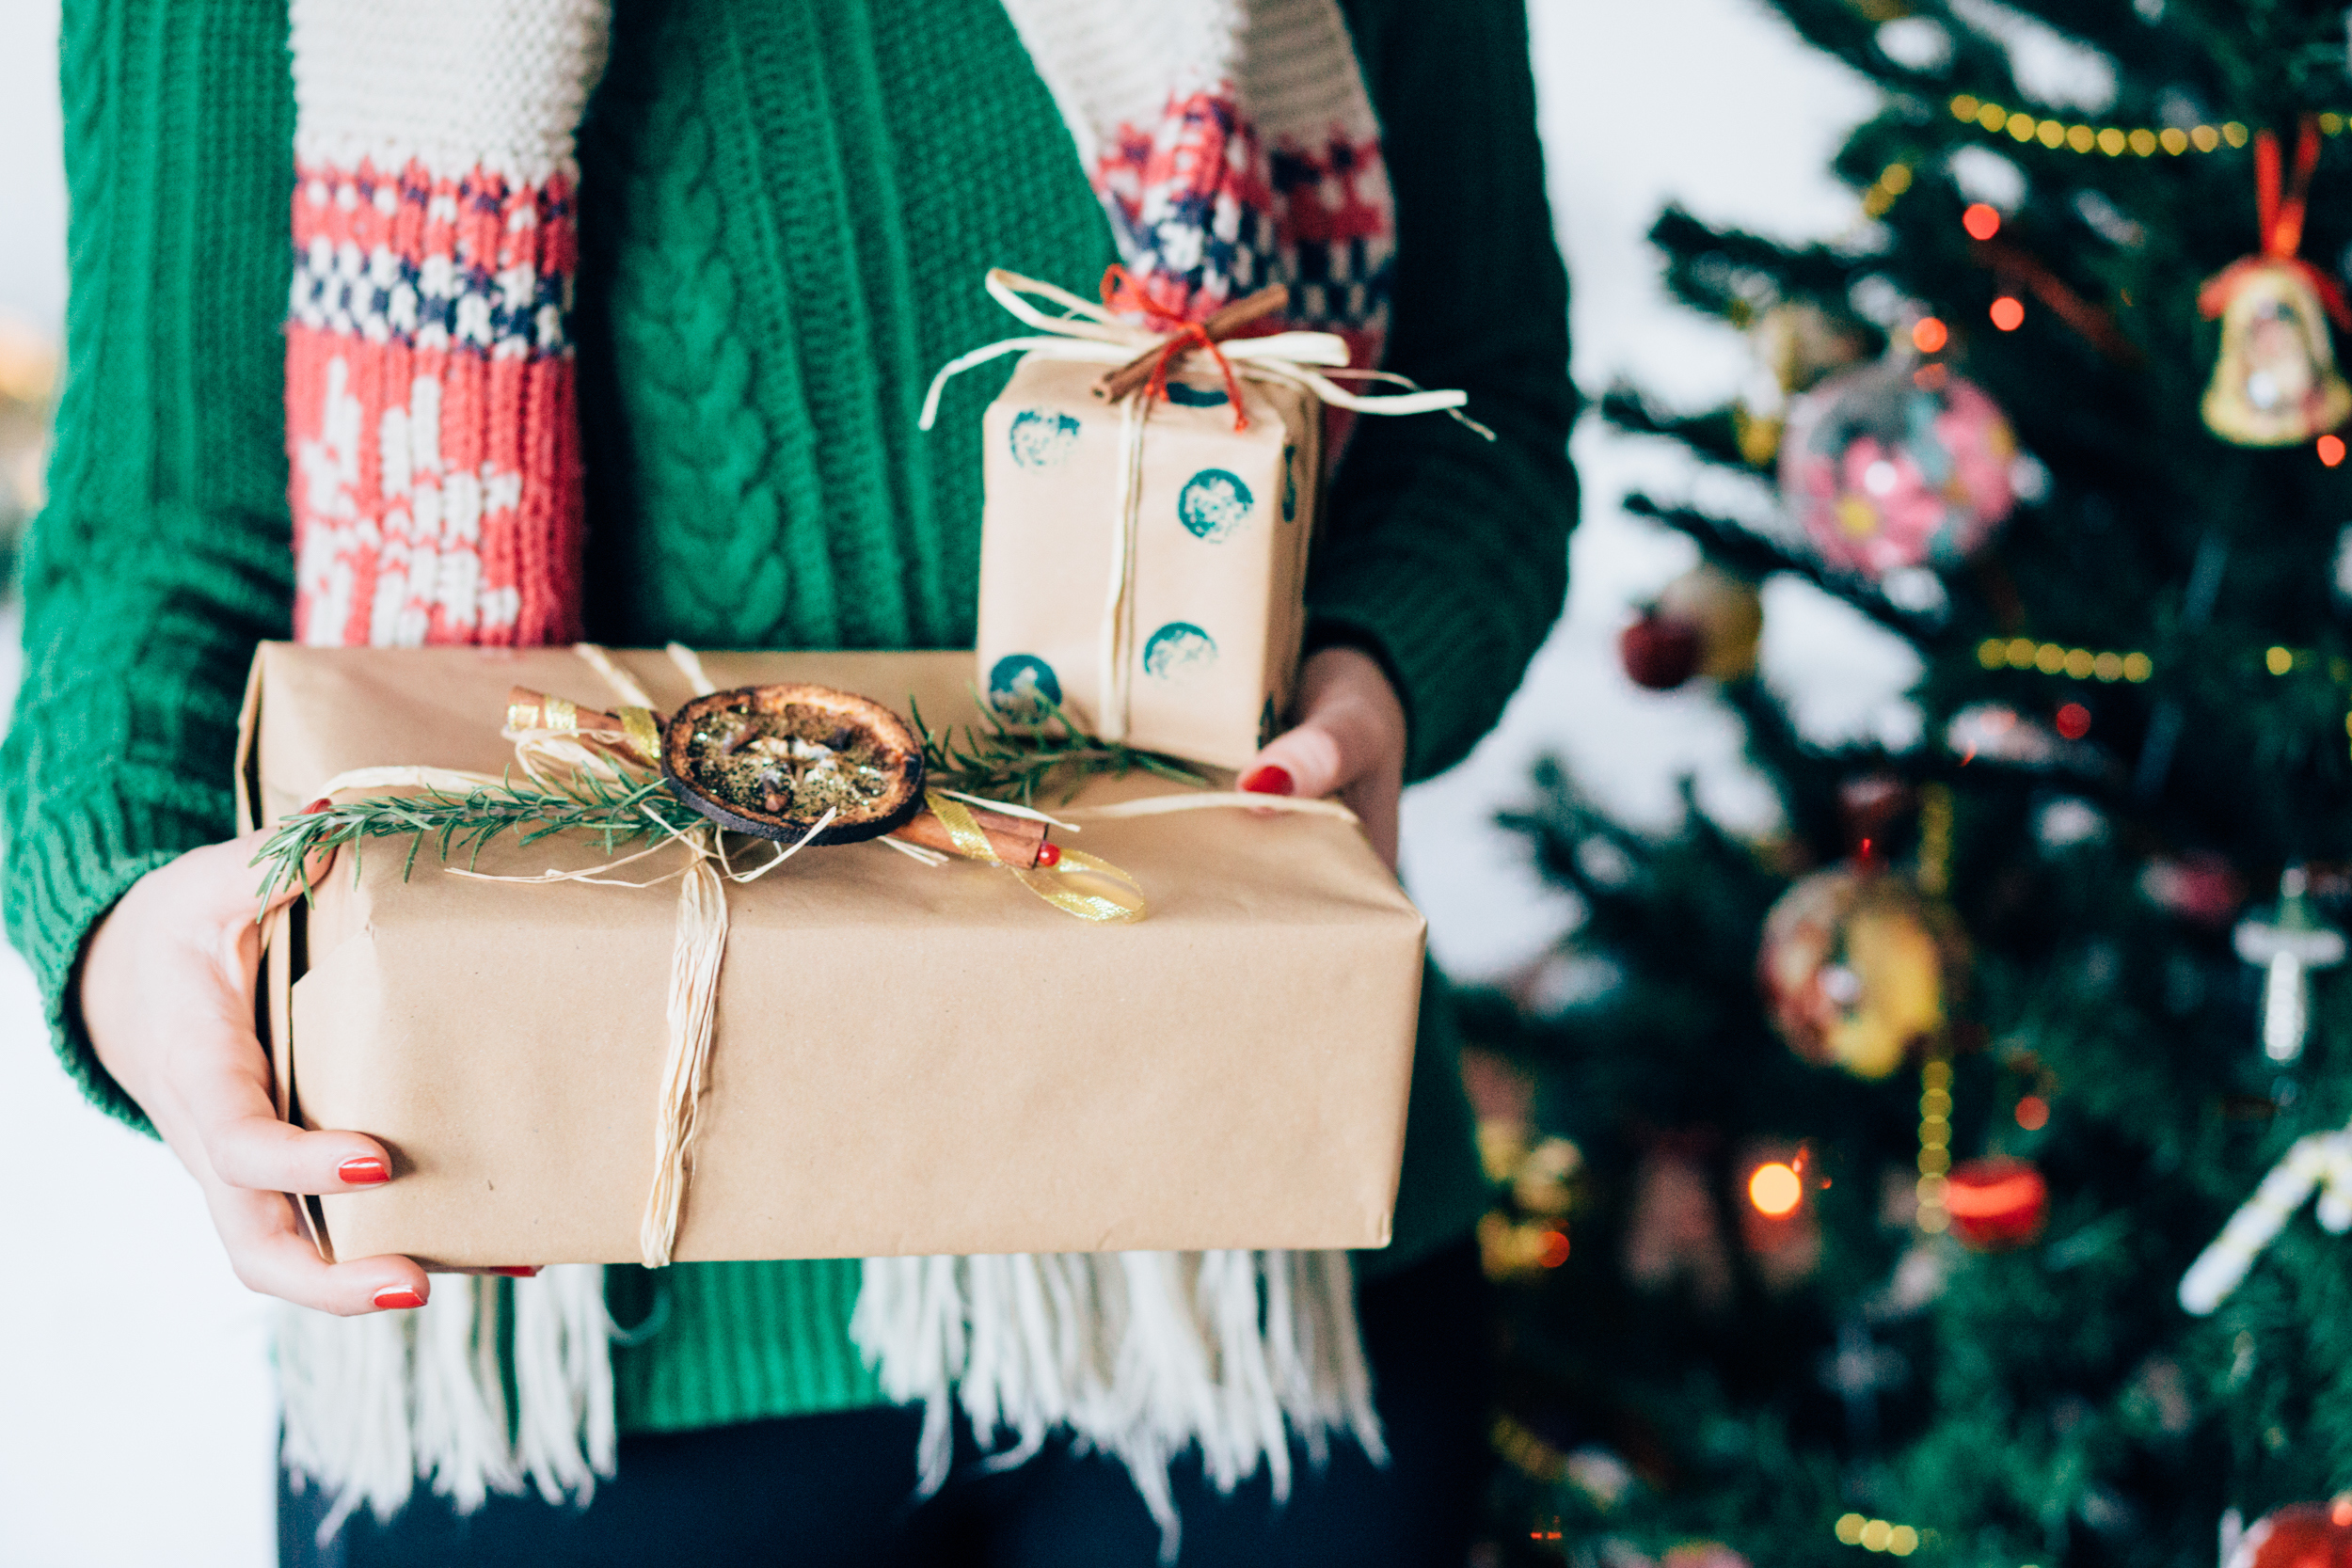 In-laws have been revealed as the worst present givers (iStock)